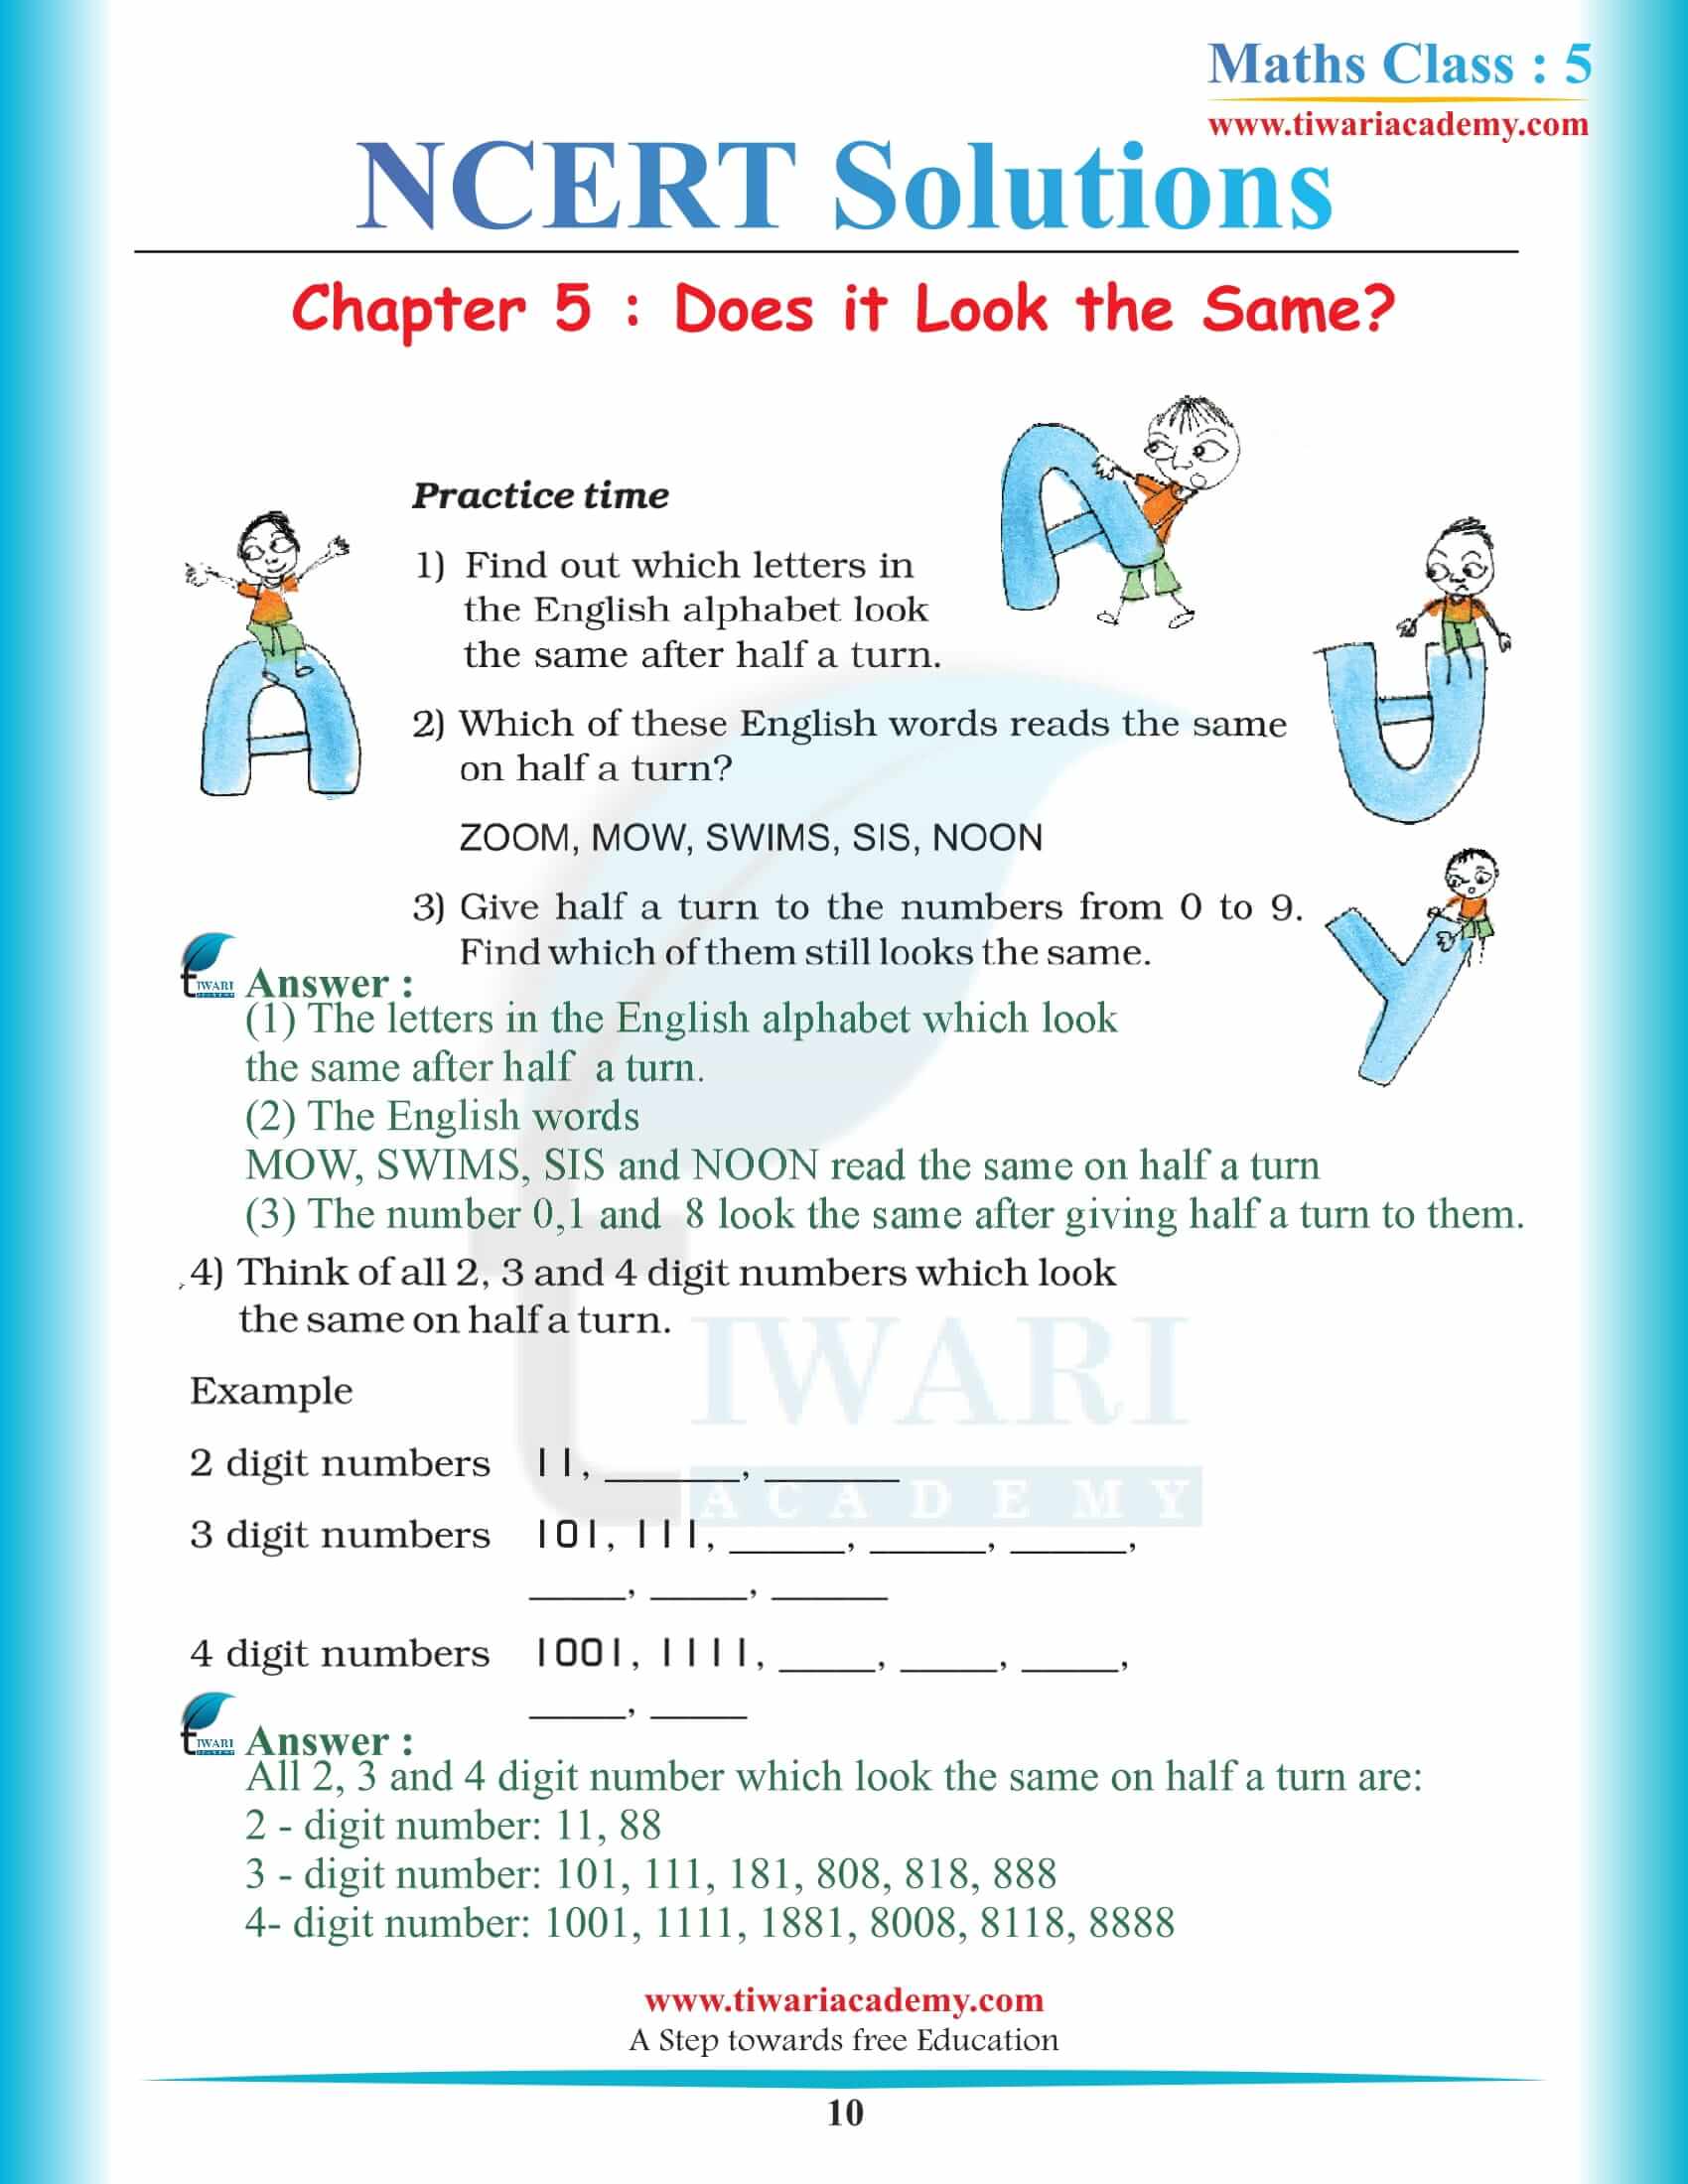 Class 5 Maths Chapter 5 Solutions in PDF file